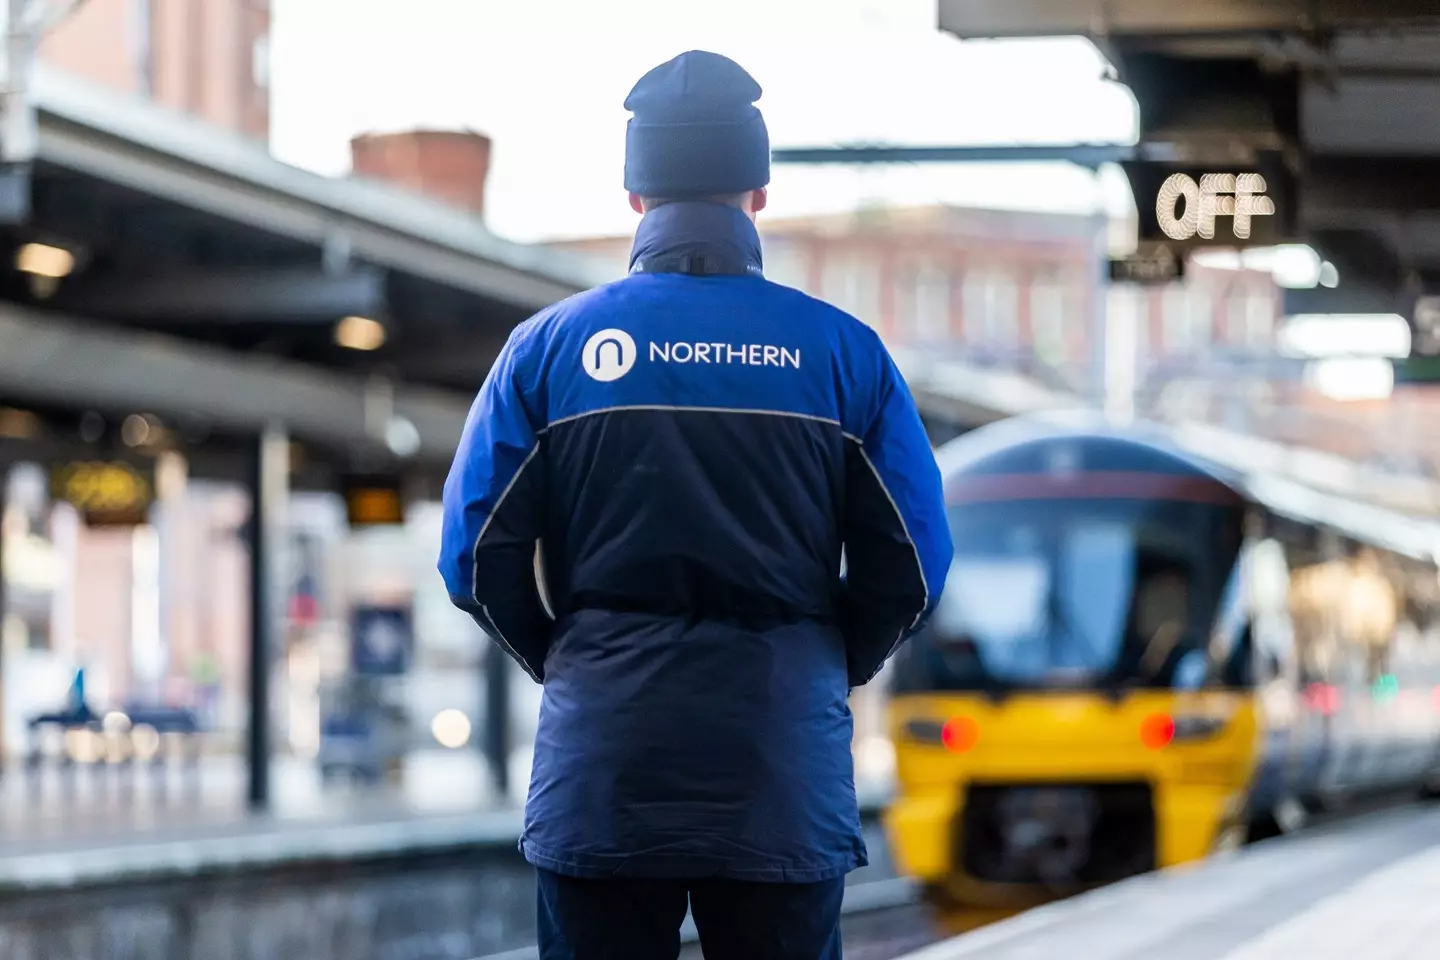 Northern staff watching as a train arrives at a platform.